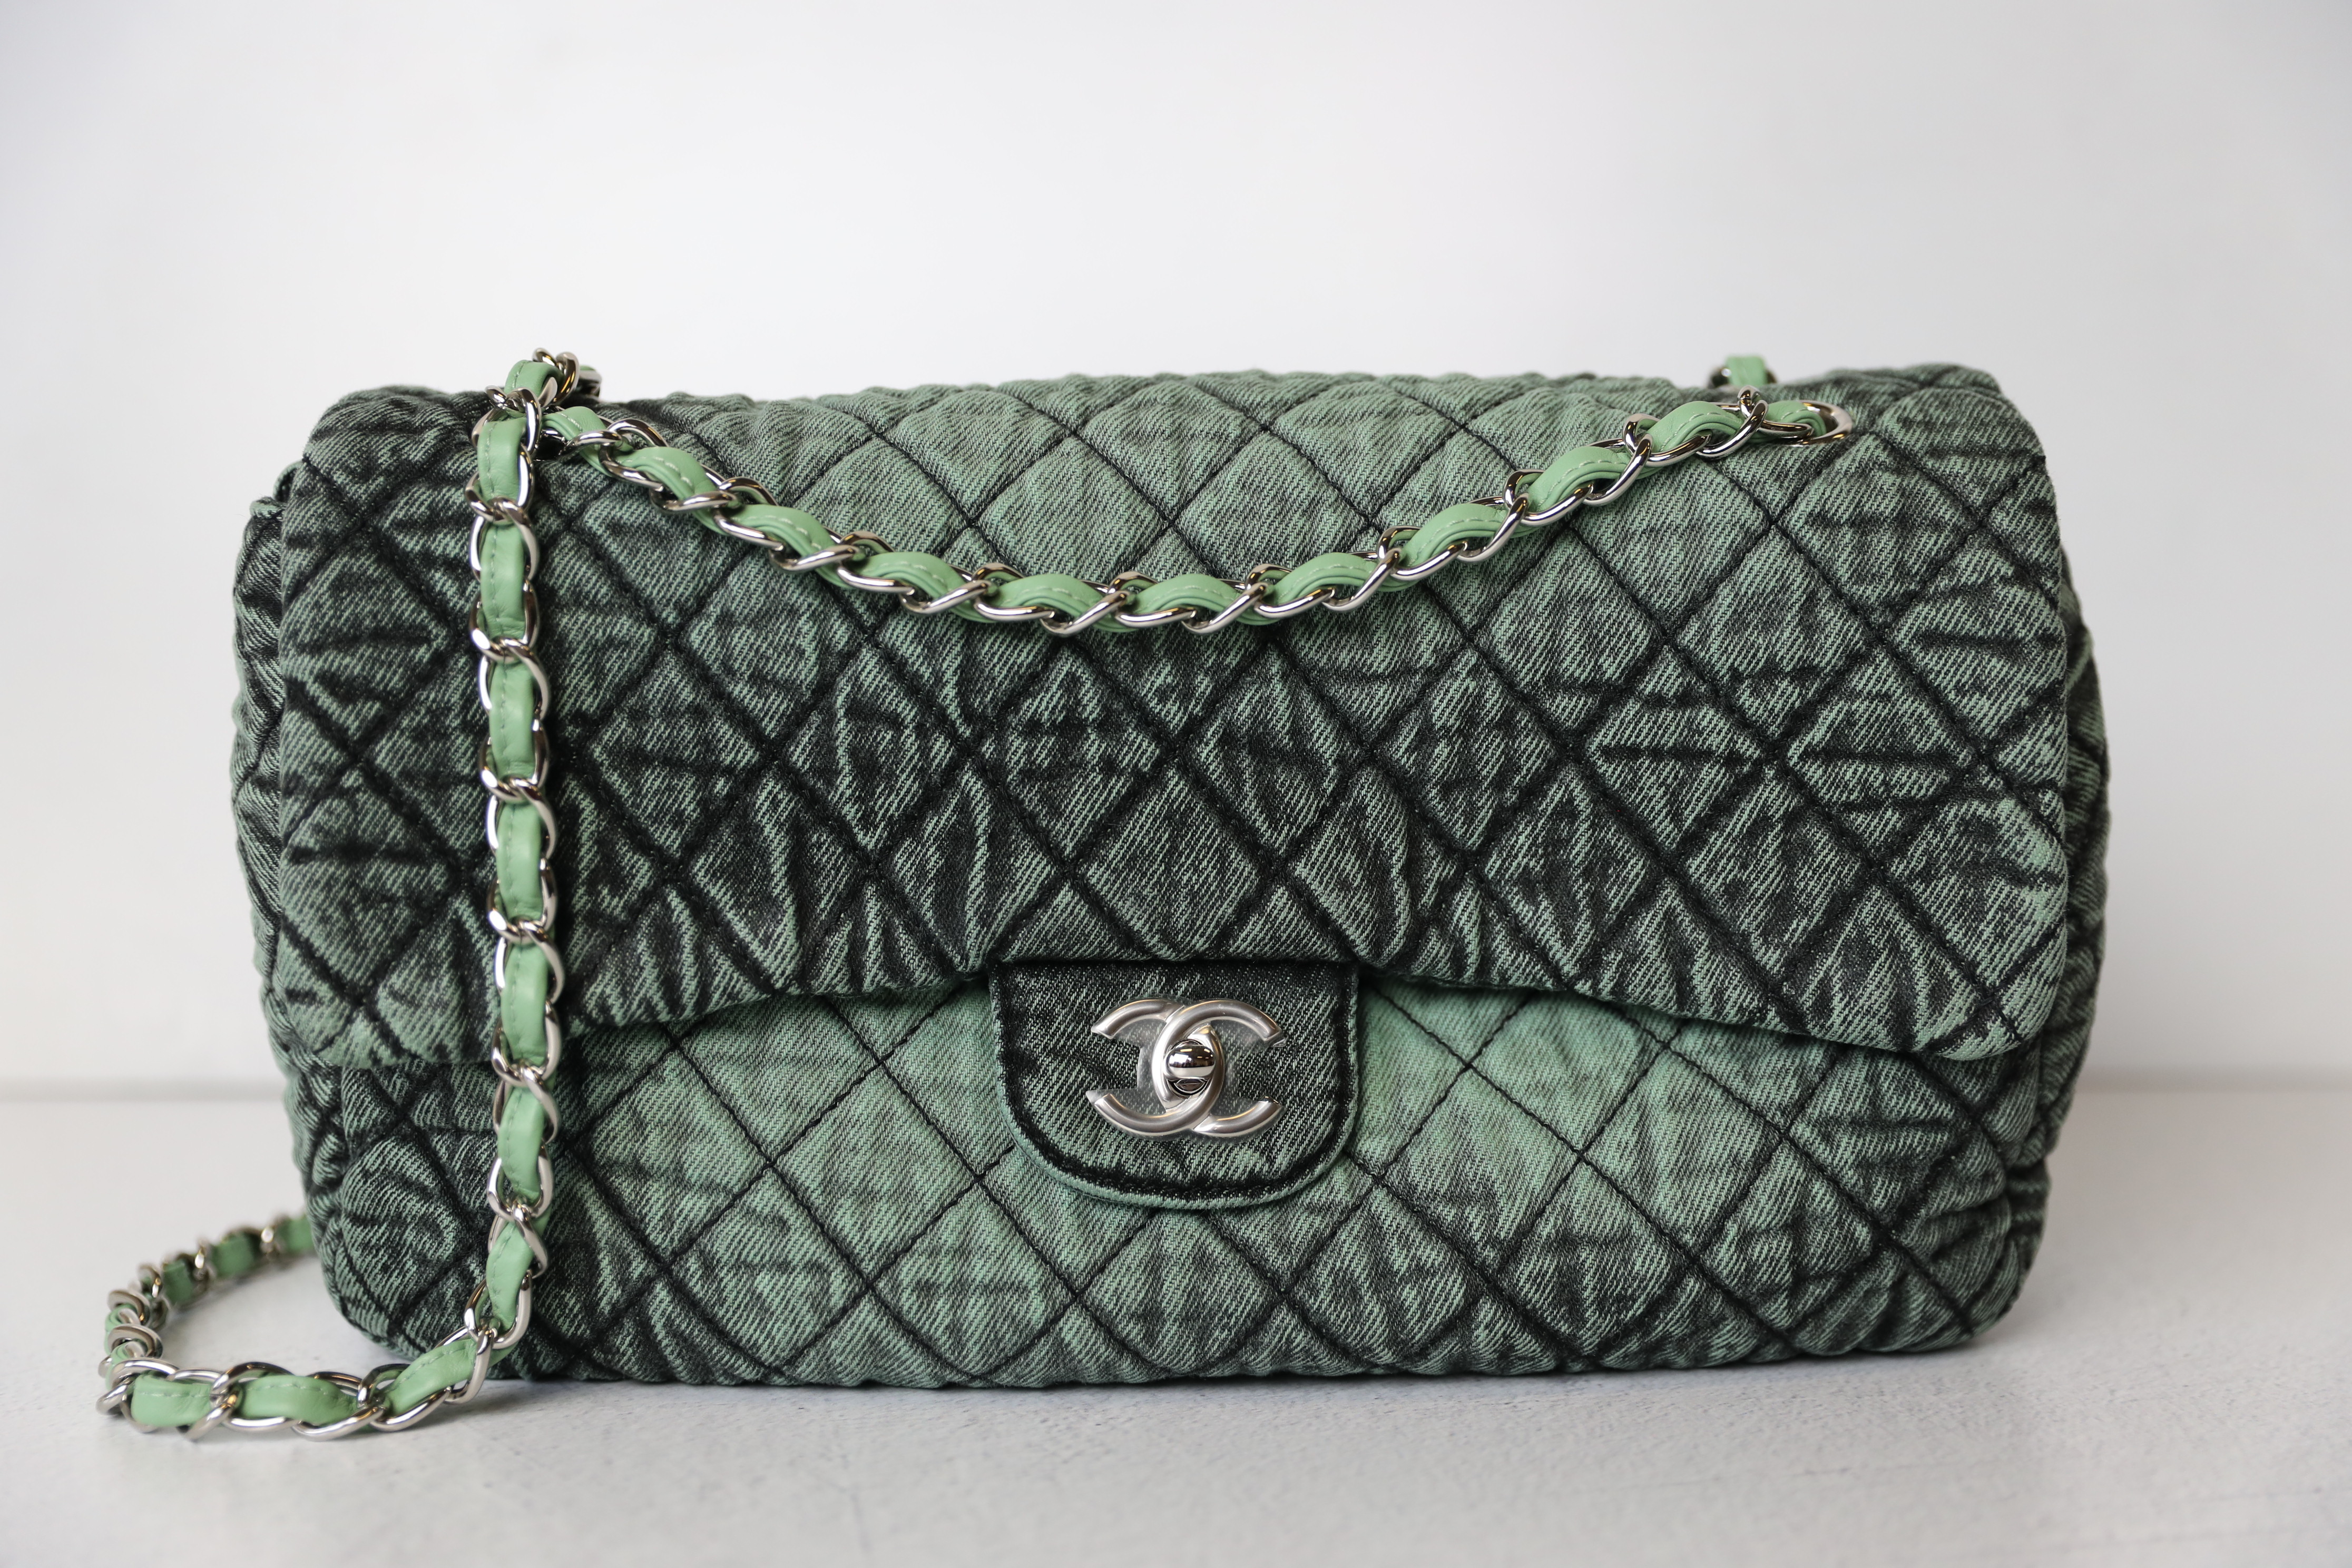 Chanel Denimpressions Flap Large, Green Denim with Silver Hardware, New  with Dustbag WA001